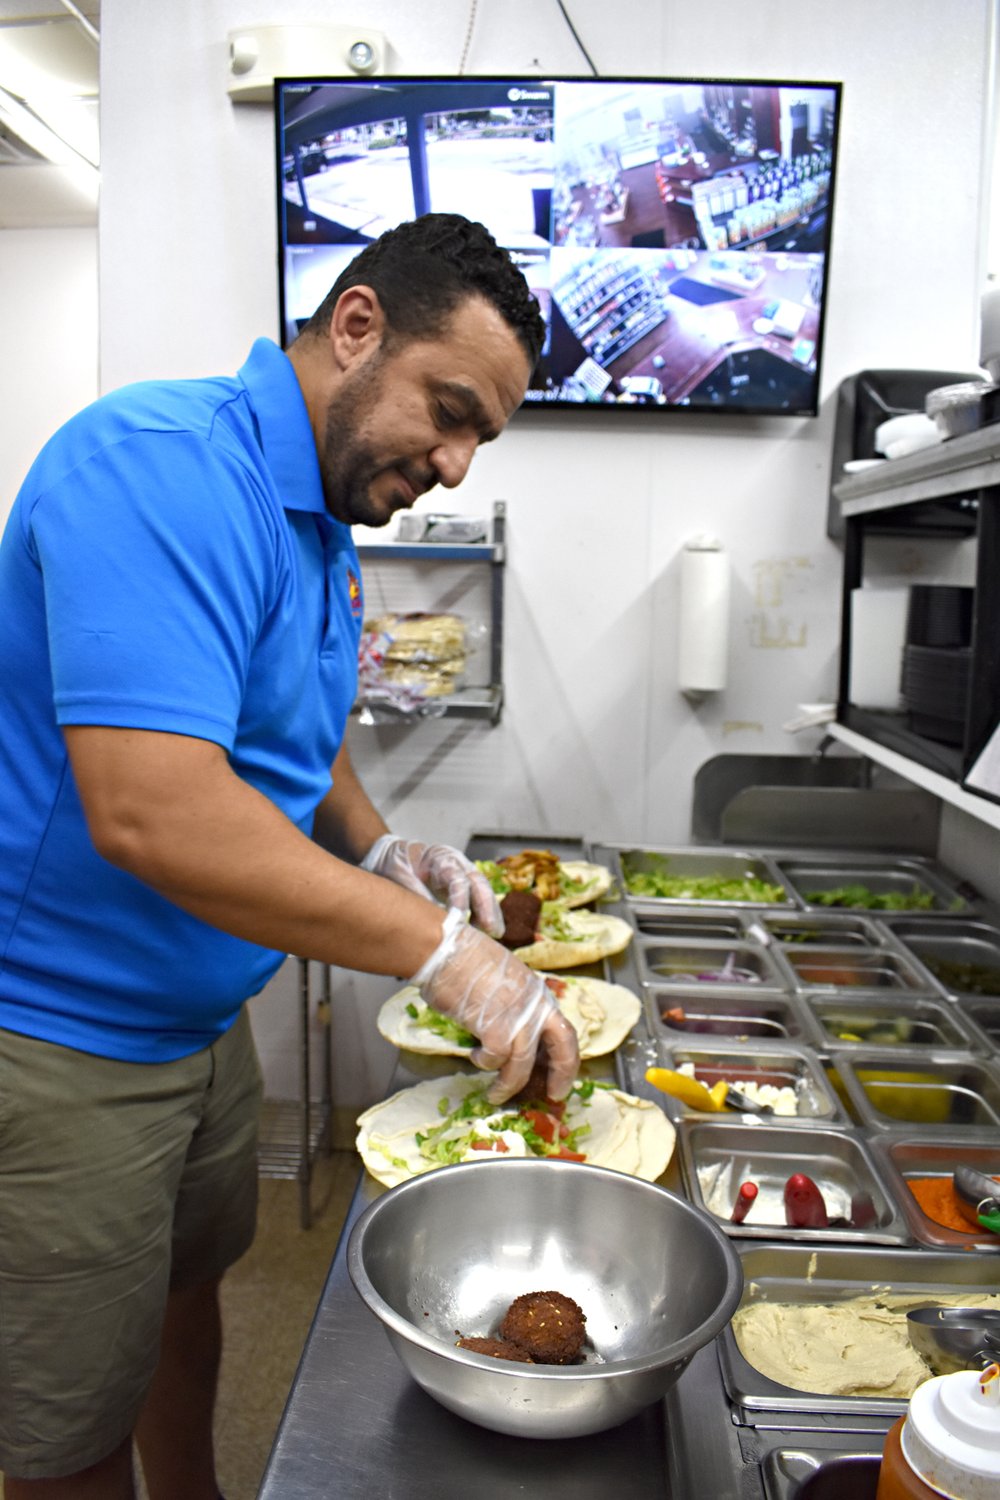  Omar Abouzaid, manager of Al Basha Mediterranean Grill, assembles a sandwich order while keeping an eye on a CCTV of the market next door. When a customer at the market approaches the register, "I sprint over" to complete the transaction, he said. (